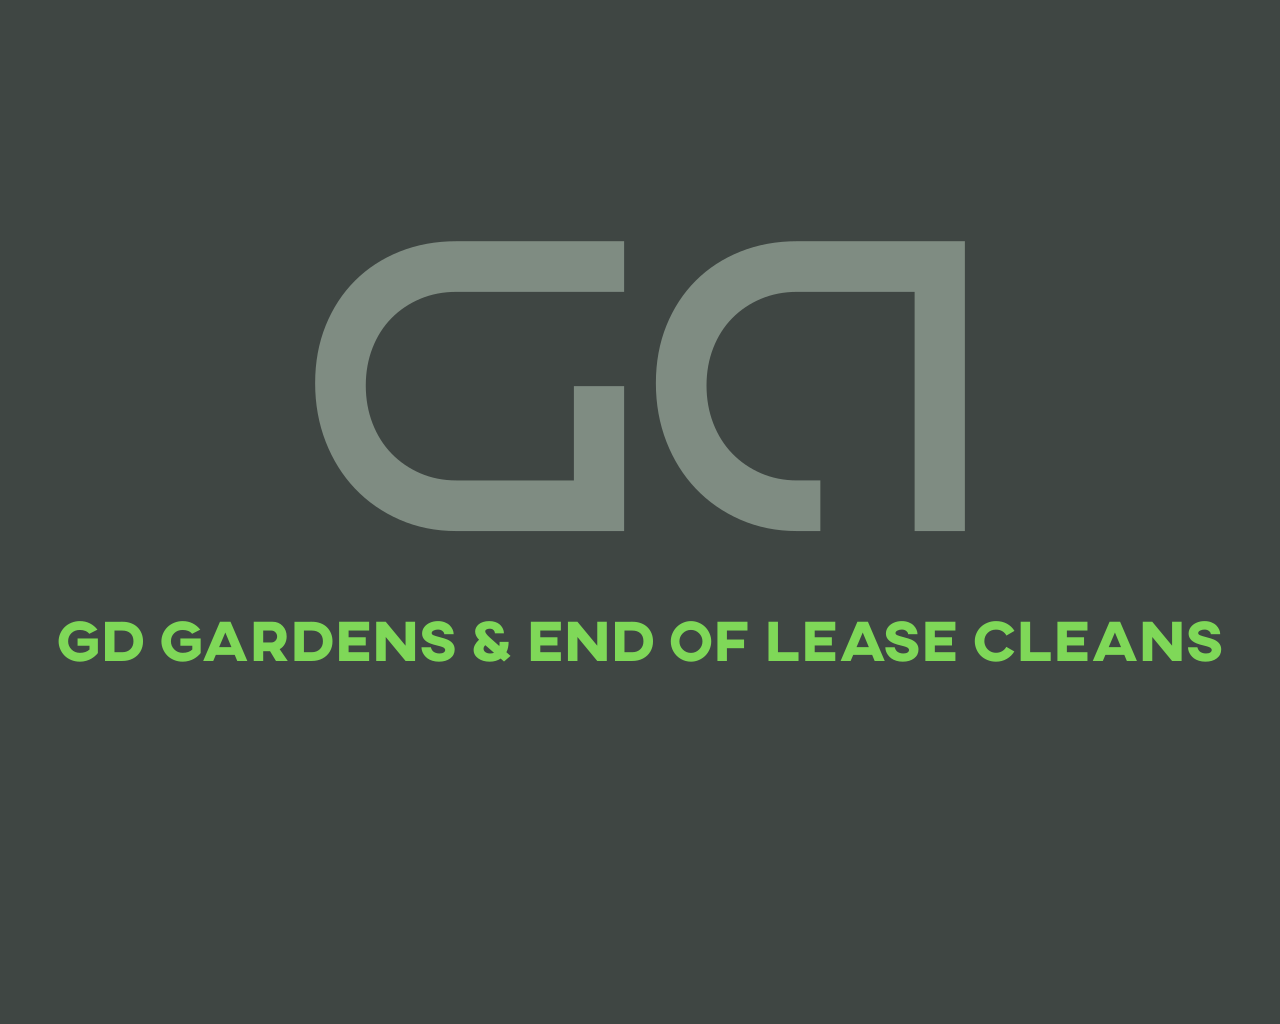 GD Gardens and end of lease cleans 's web page